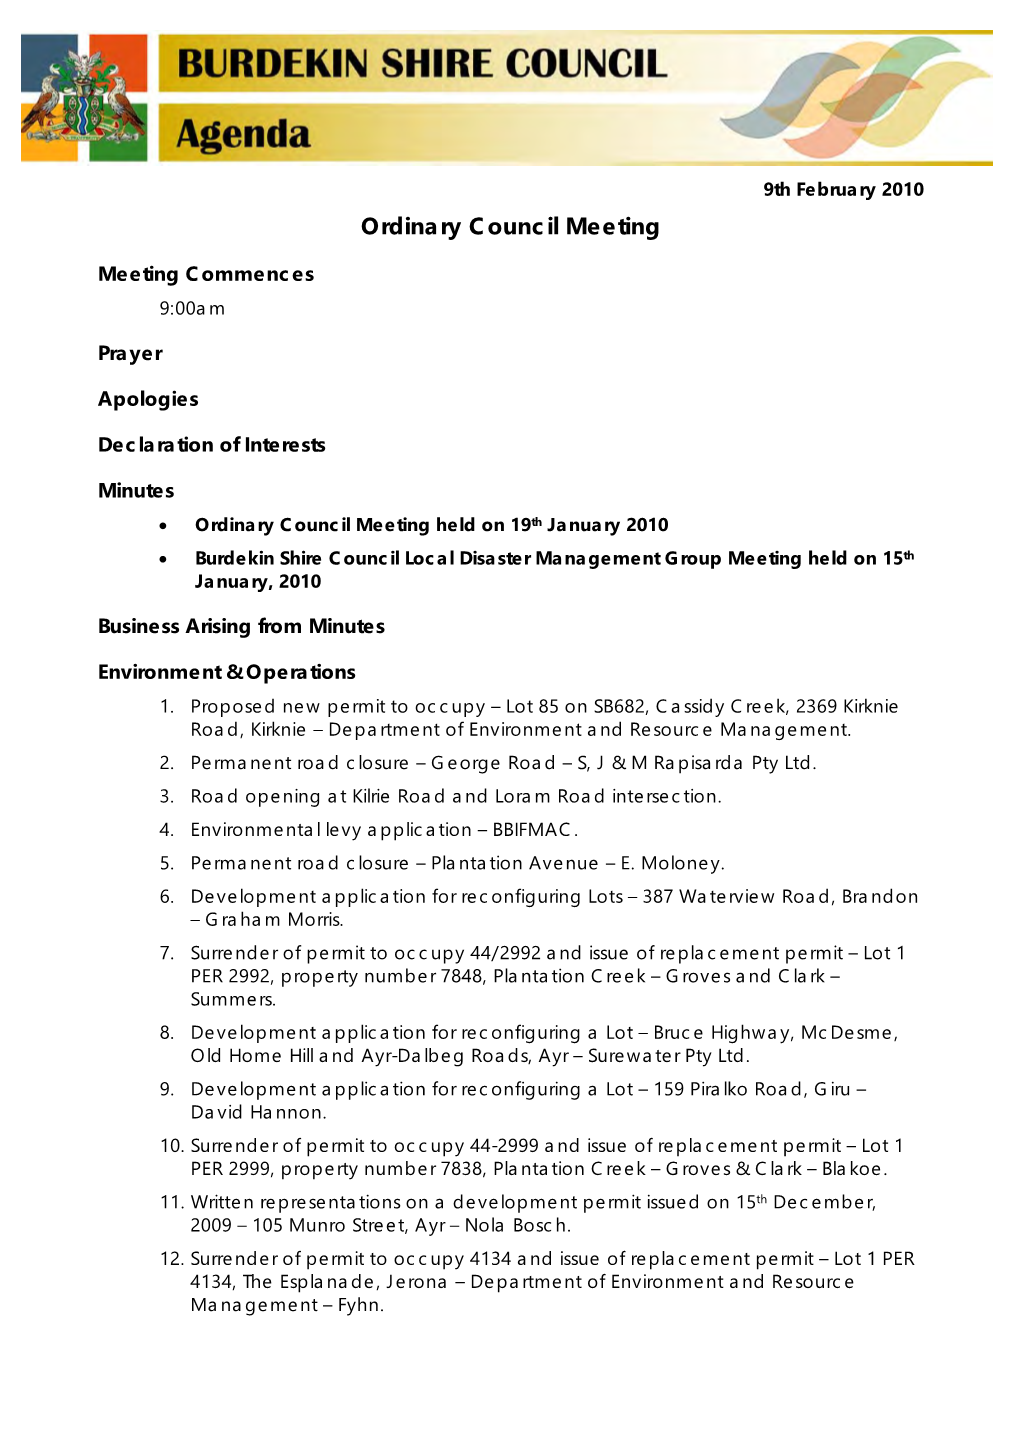 9Th February 2010 Ordinary Council Meeting